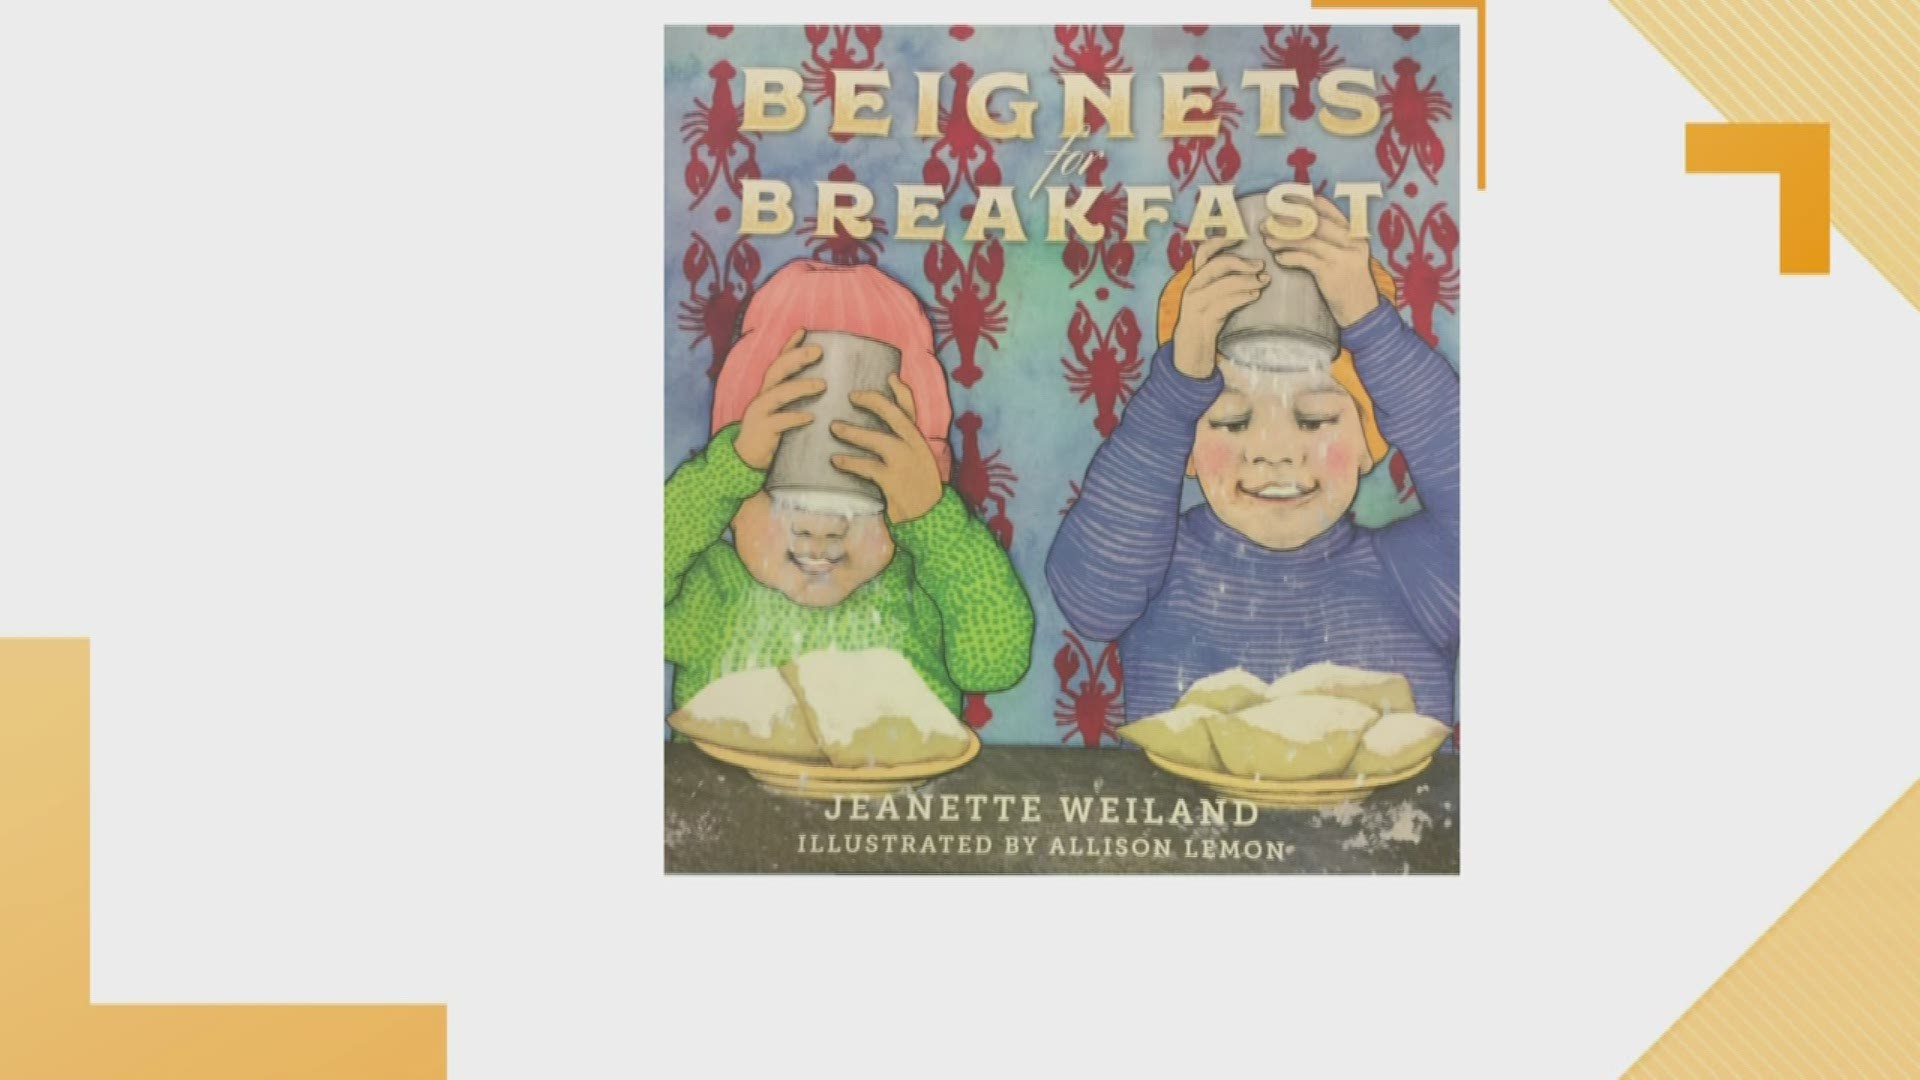 Author Jeanette Weiland is capturing the magic of New Orleans with her new children's book "Beignets for Breakfast."